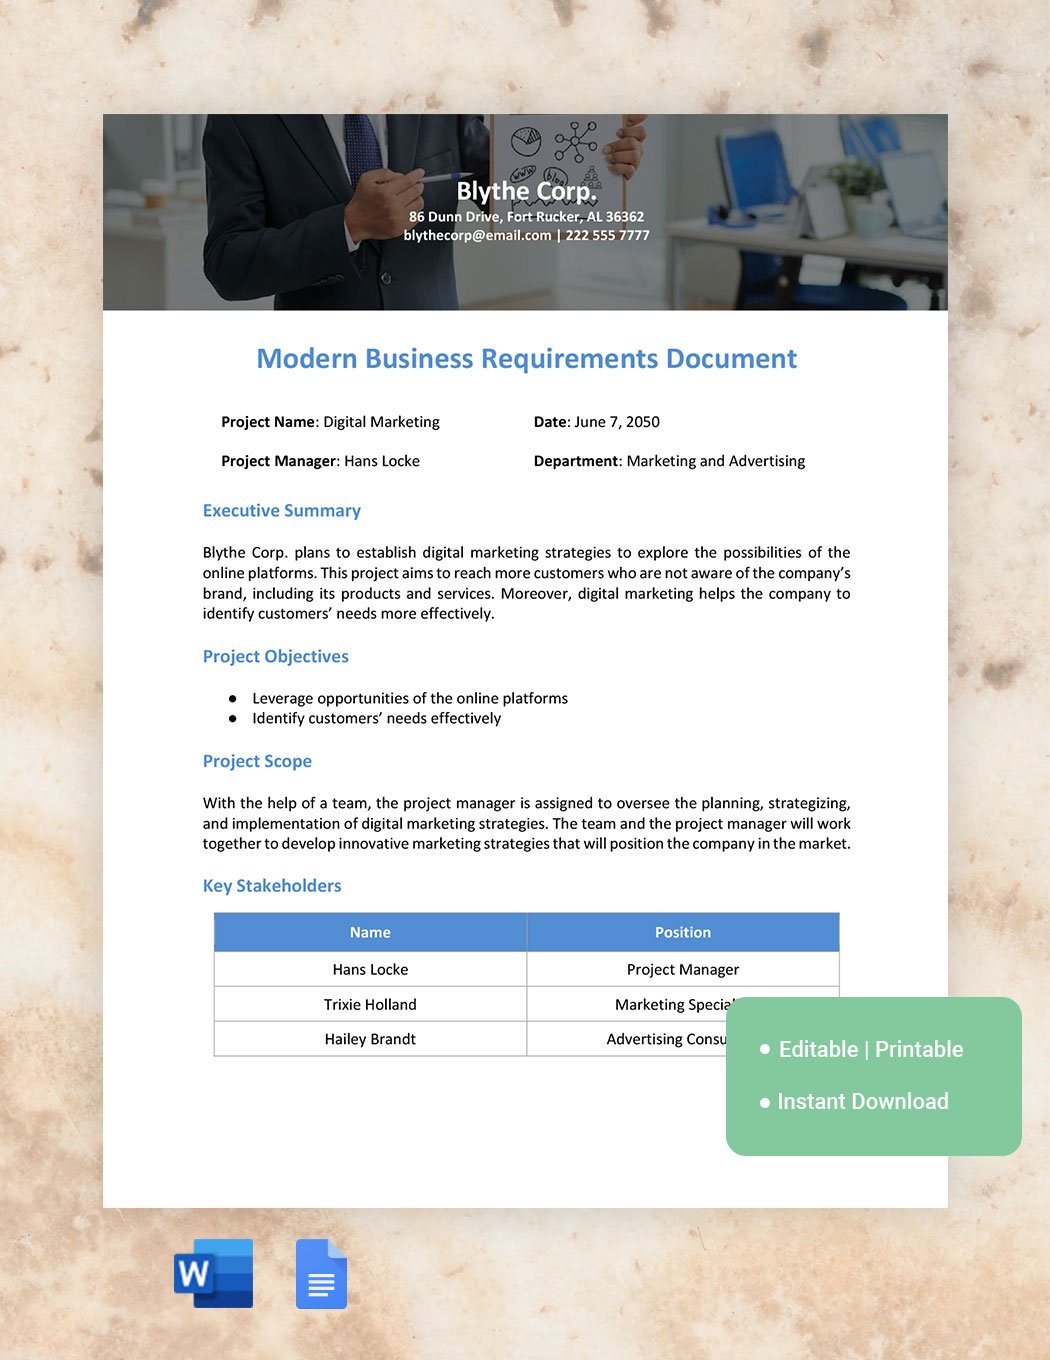 Free Modern Business Requirements Document Template in Word, Google Docs